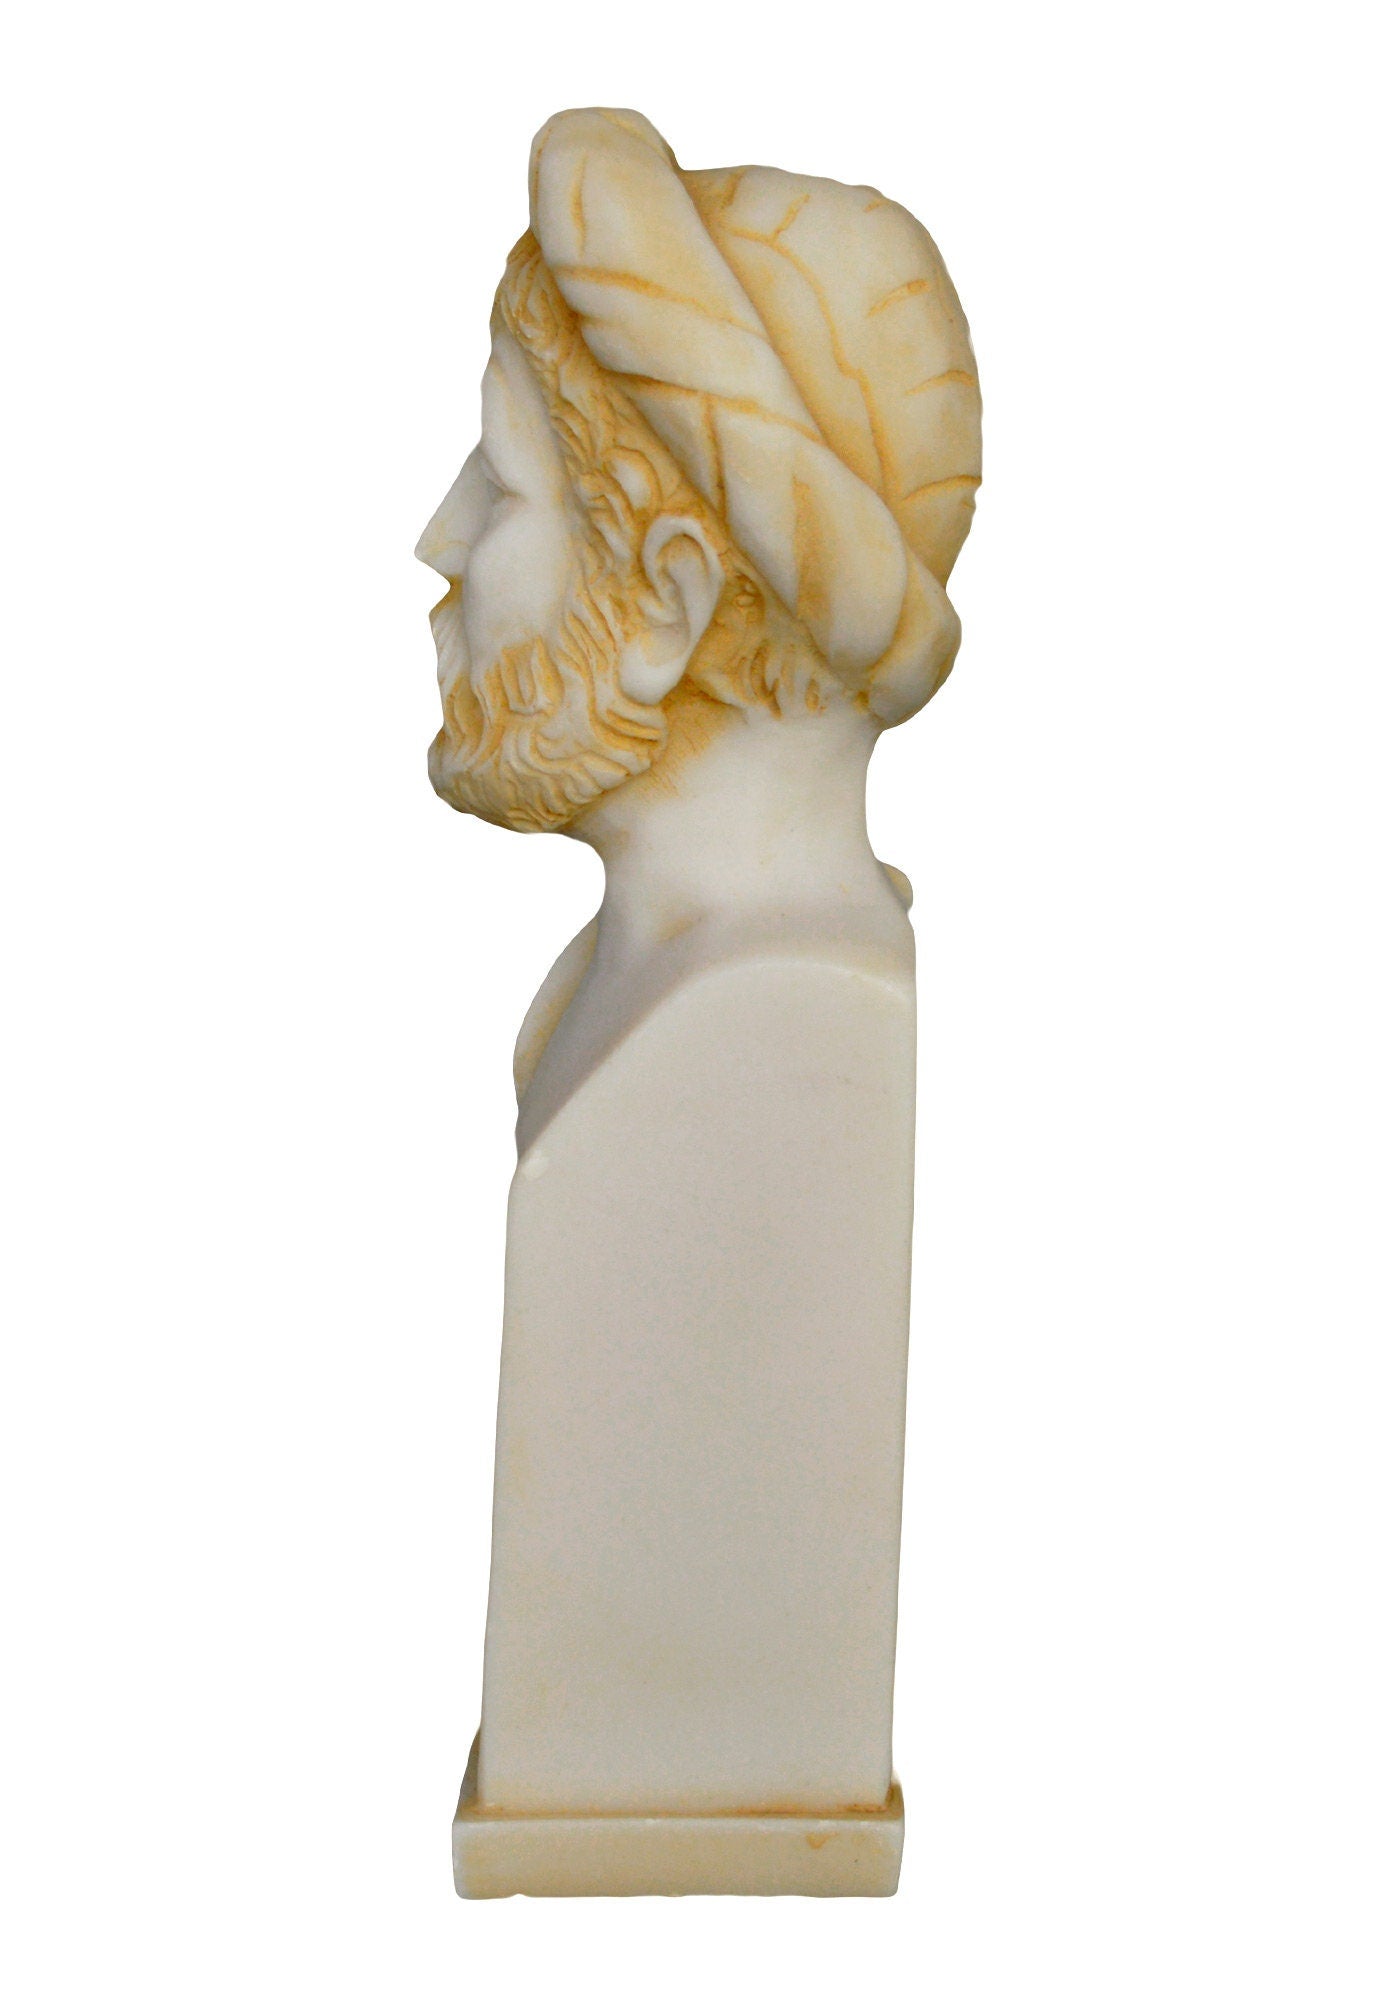 Pythagoras of Samos Bust -  570–495 BC - Ancient Greek Philosopher and Mathematician - Immortality of the Soul - Aged Alabaster Statue